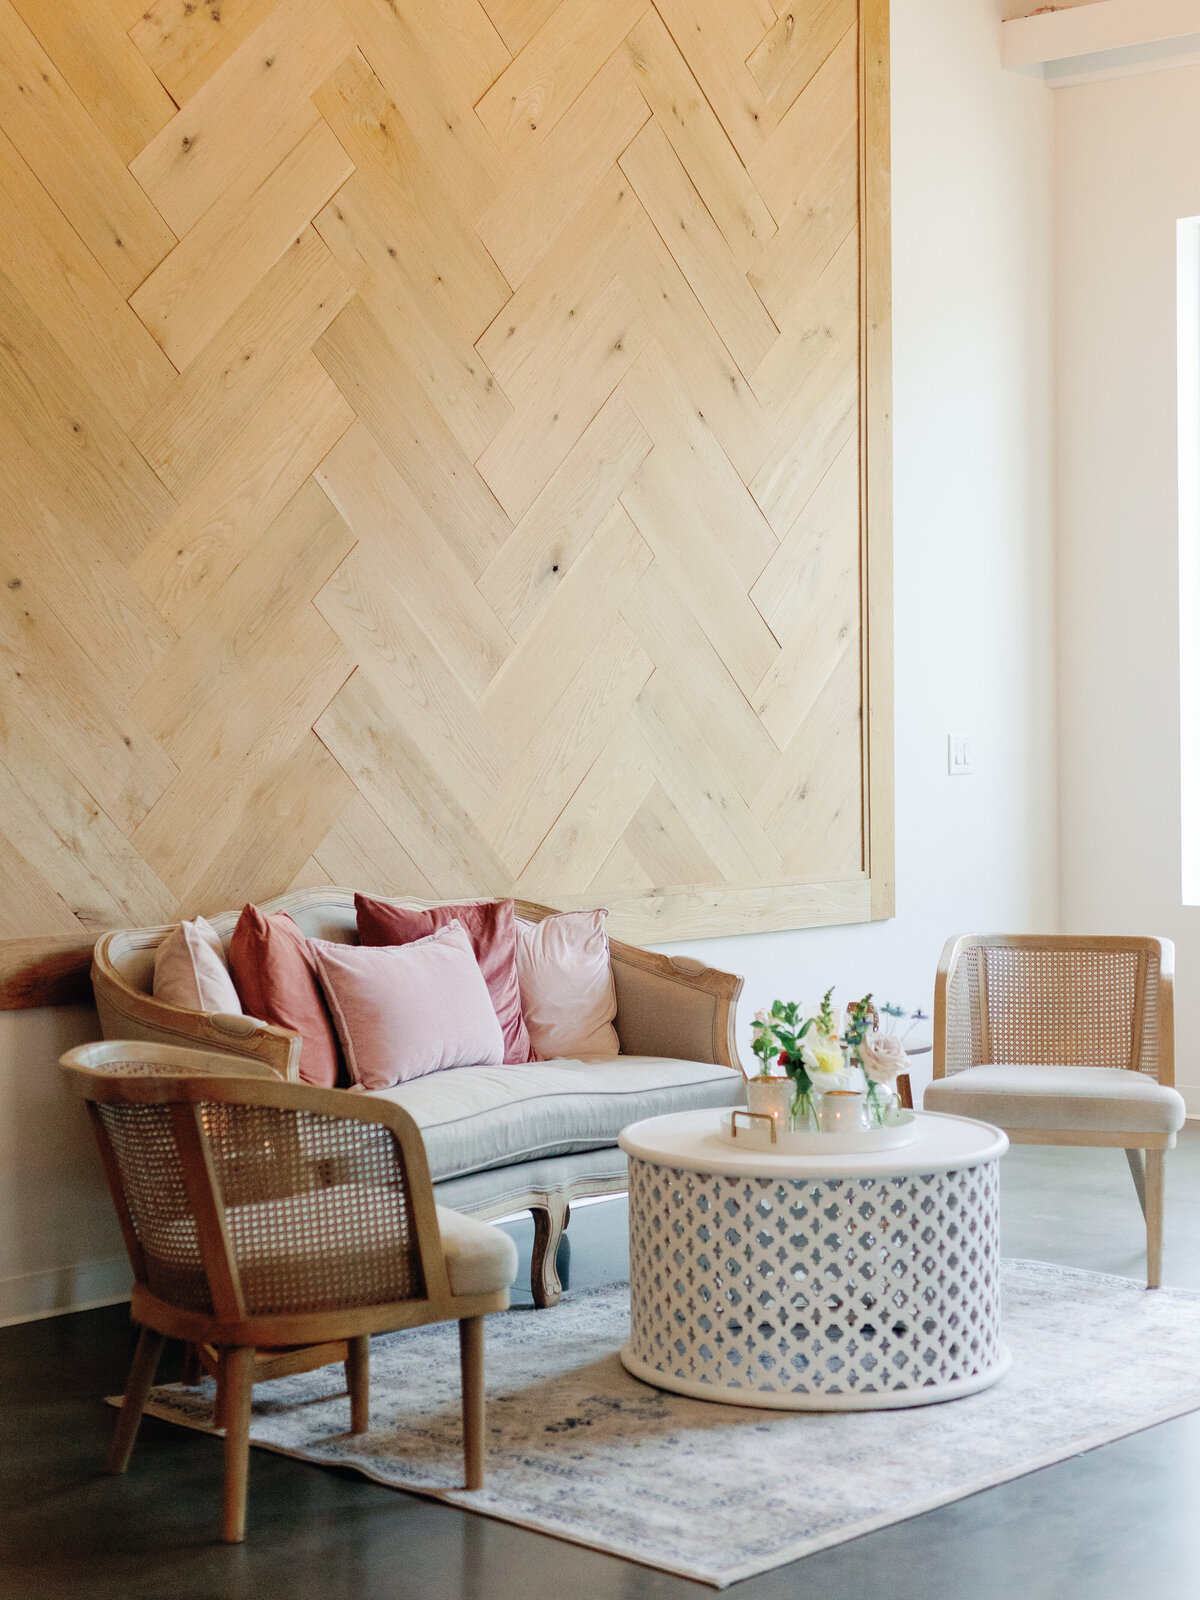 pink and white lounge set in front of herringbone wall